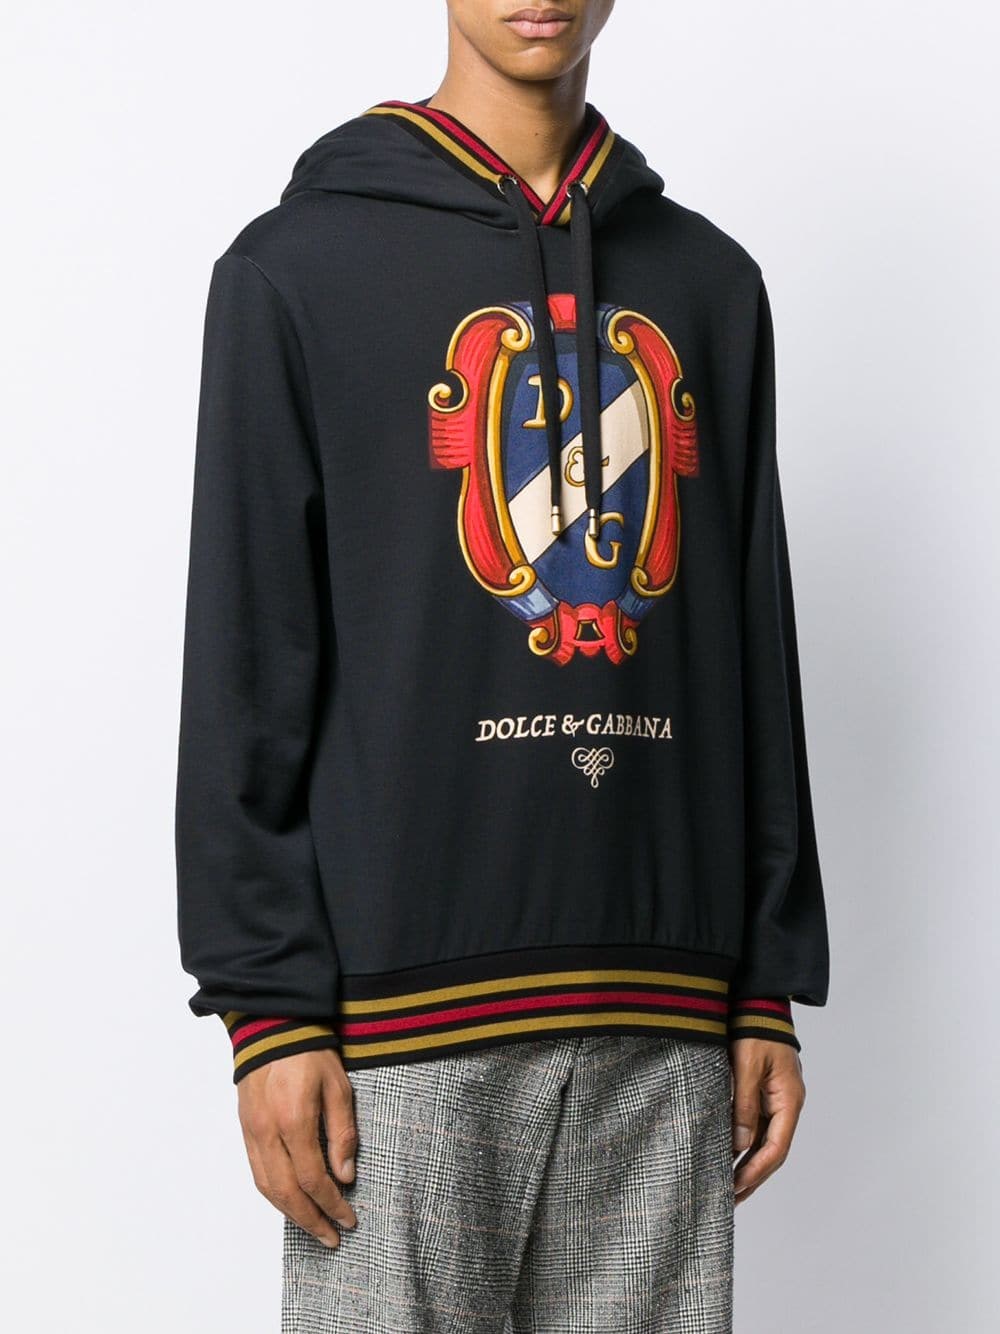 dolce & gabbana HOODIE PRINTED SWEATER available on montiboutique.com ...